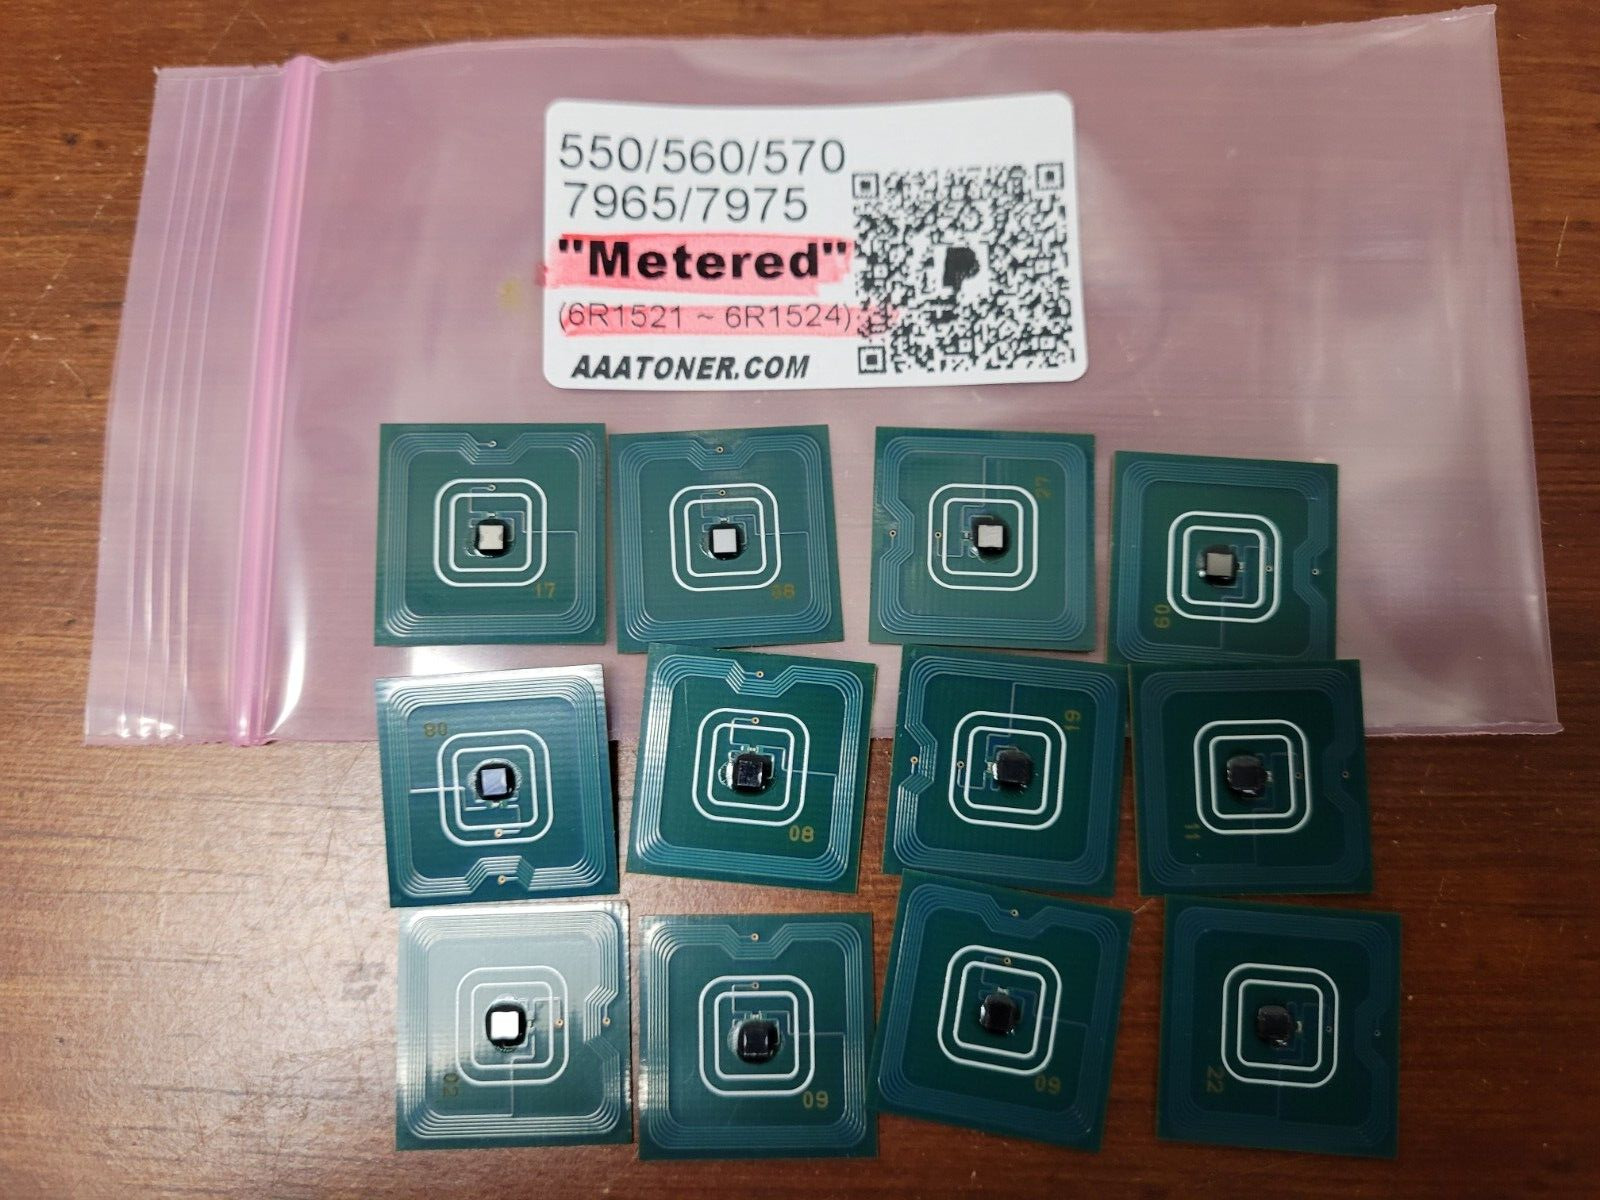 12 x Toner Chip (1521 - METERED) for Xerox 550, 560, 570 WC 7965, 7975 Refill